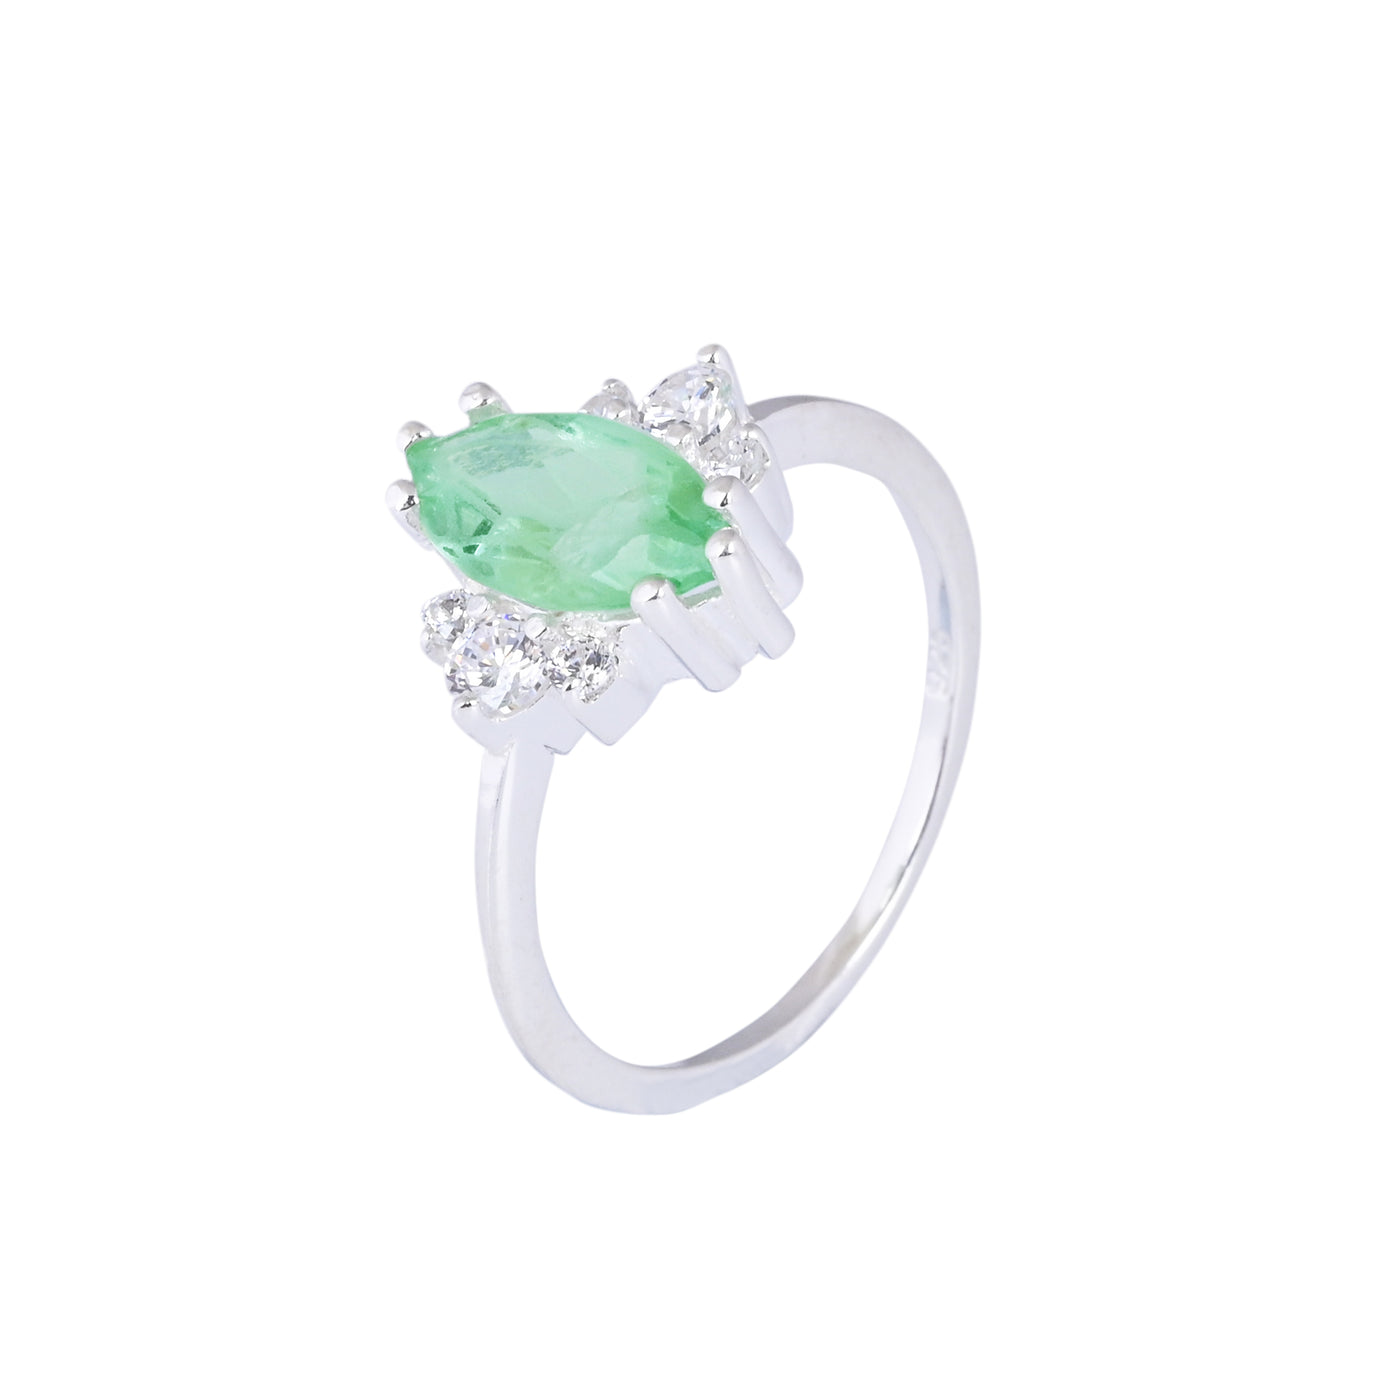 Mint Green Tourmaline Statement Ring Gift for Her